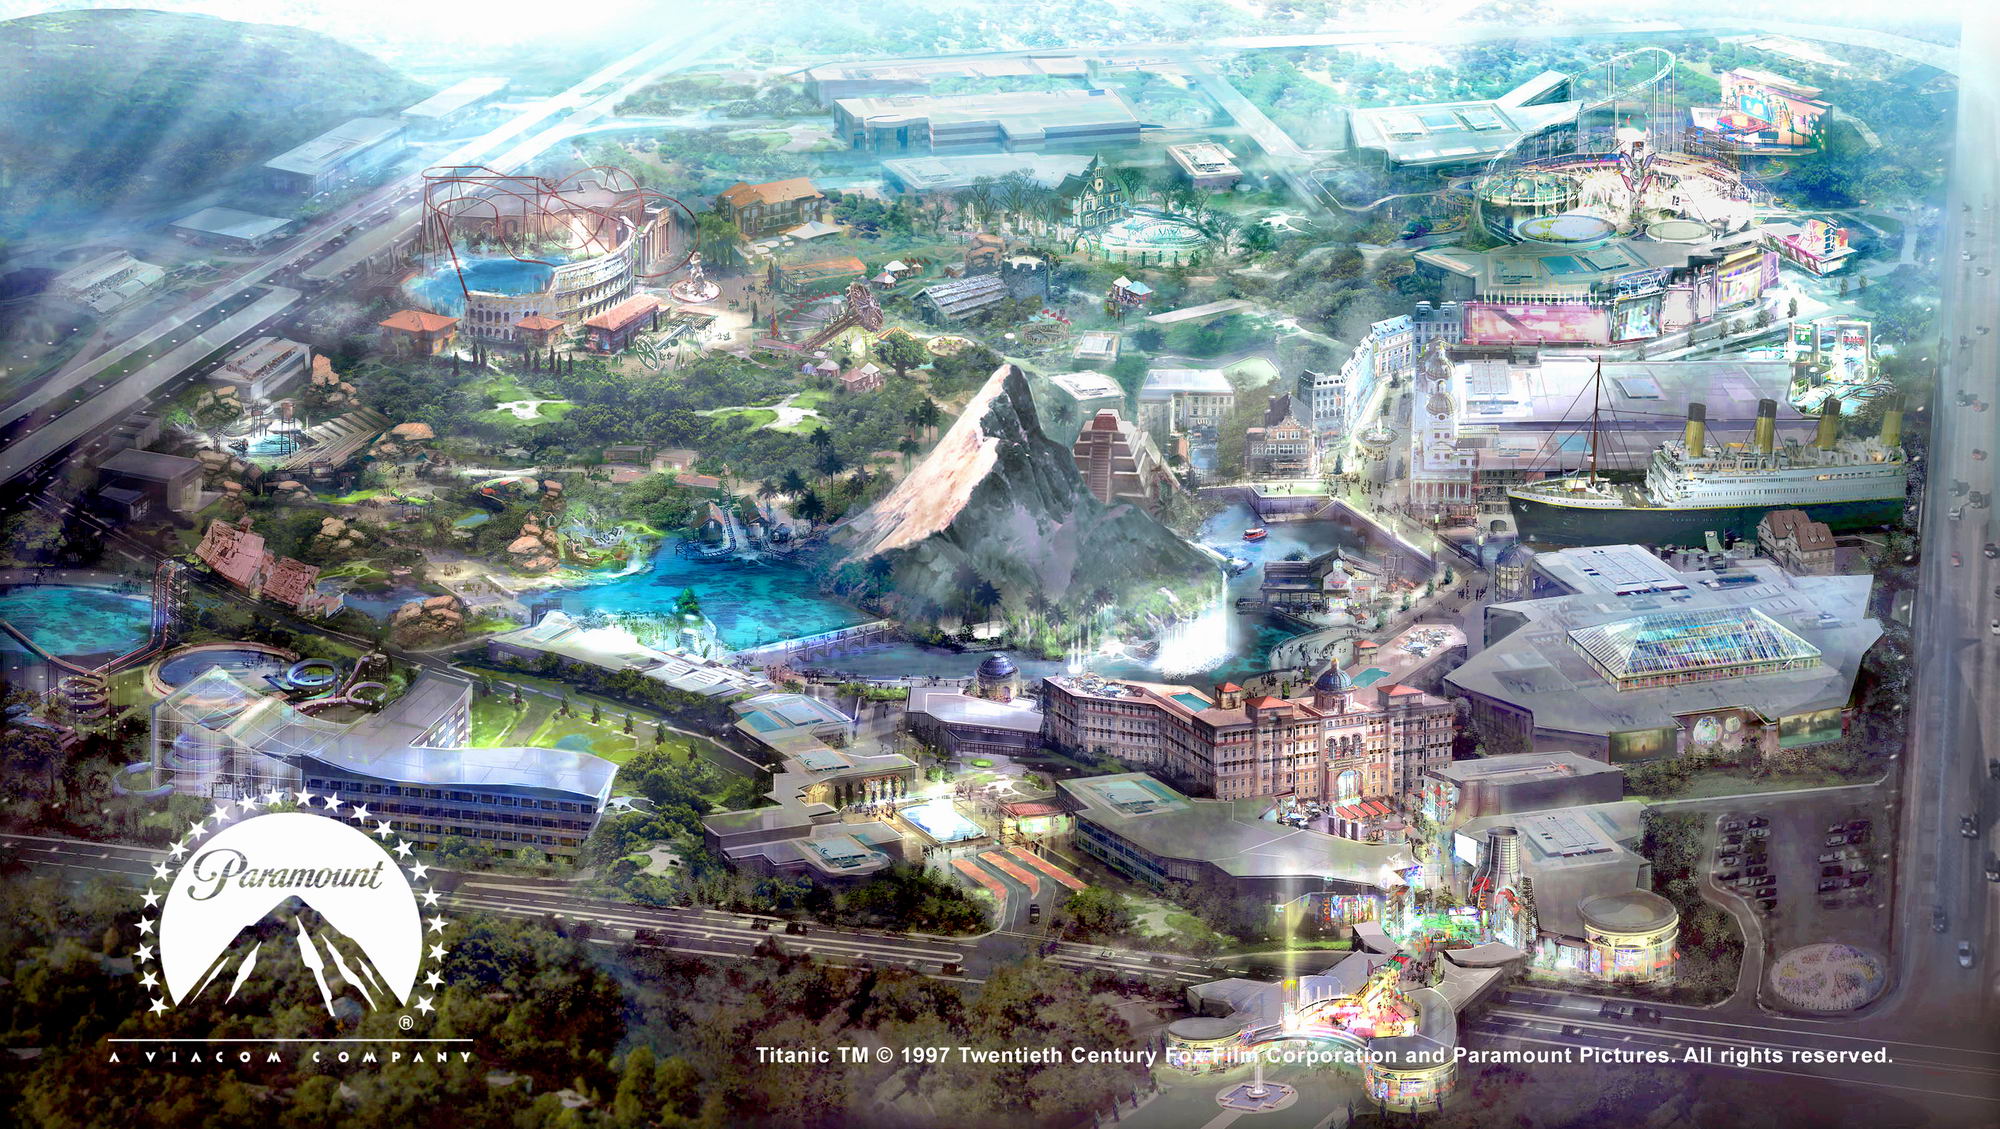 What we know about the American Heartland Theme Park